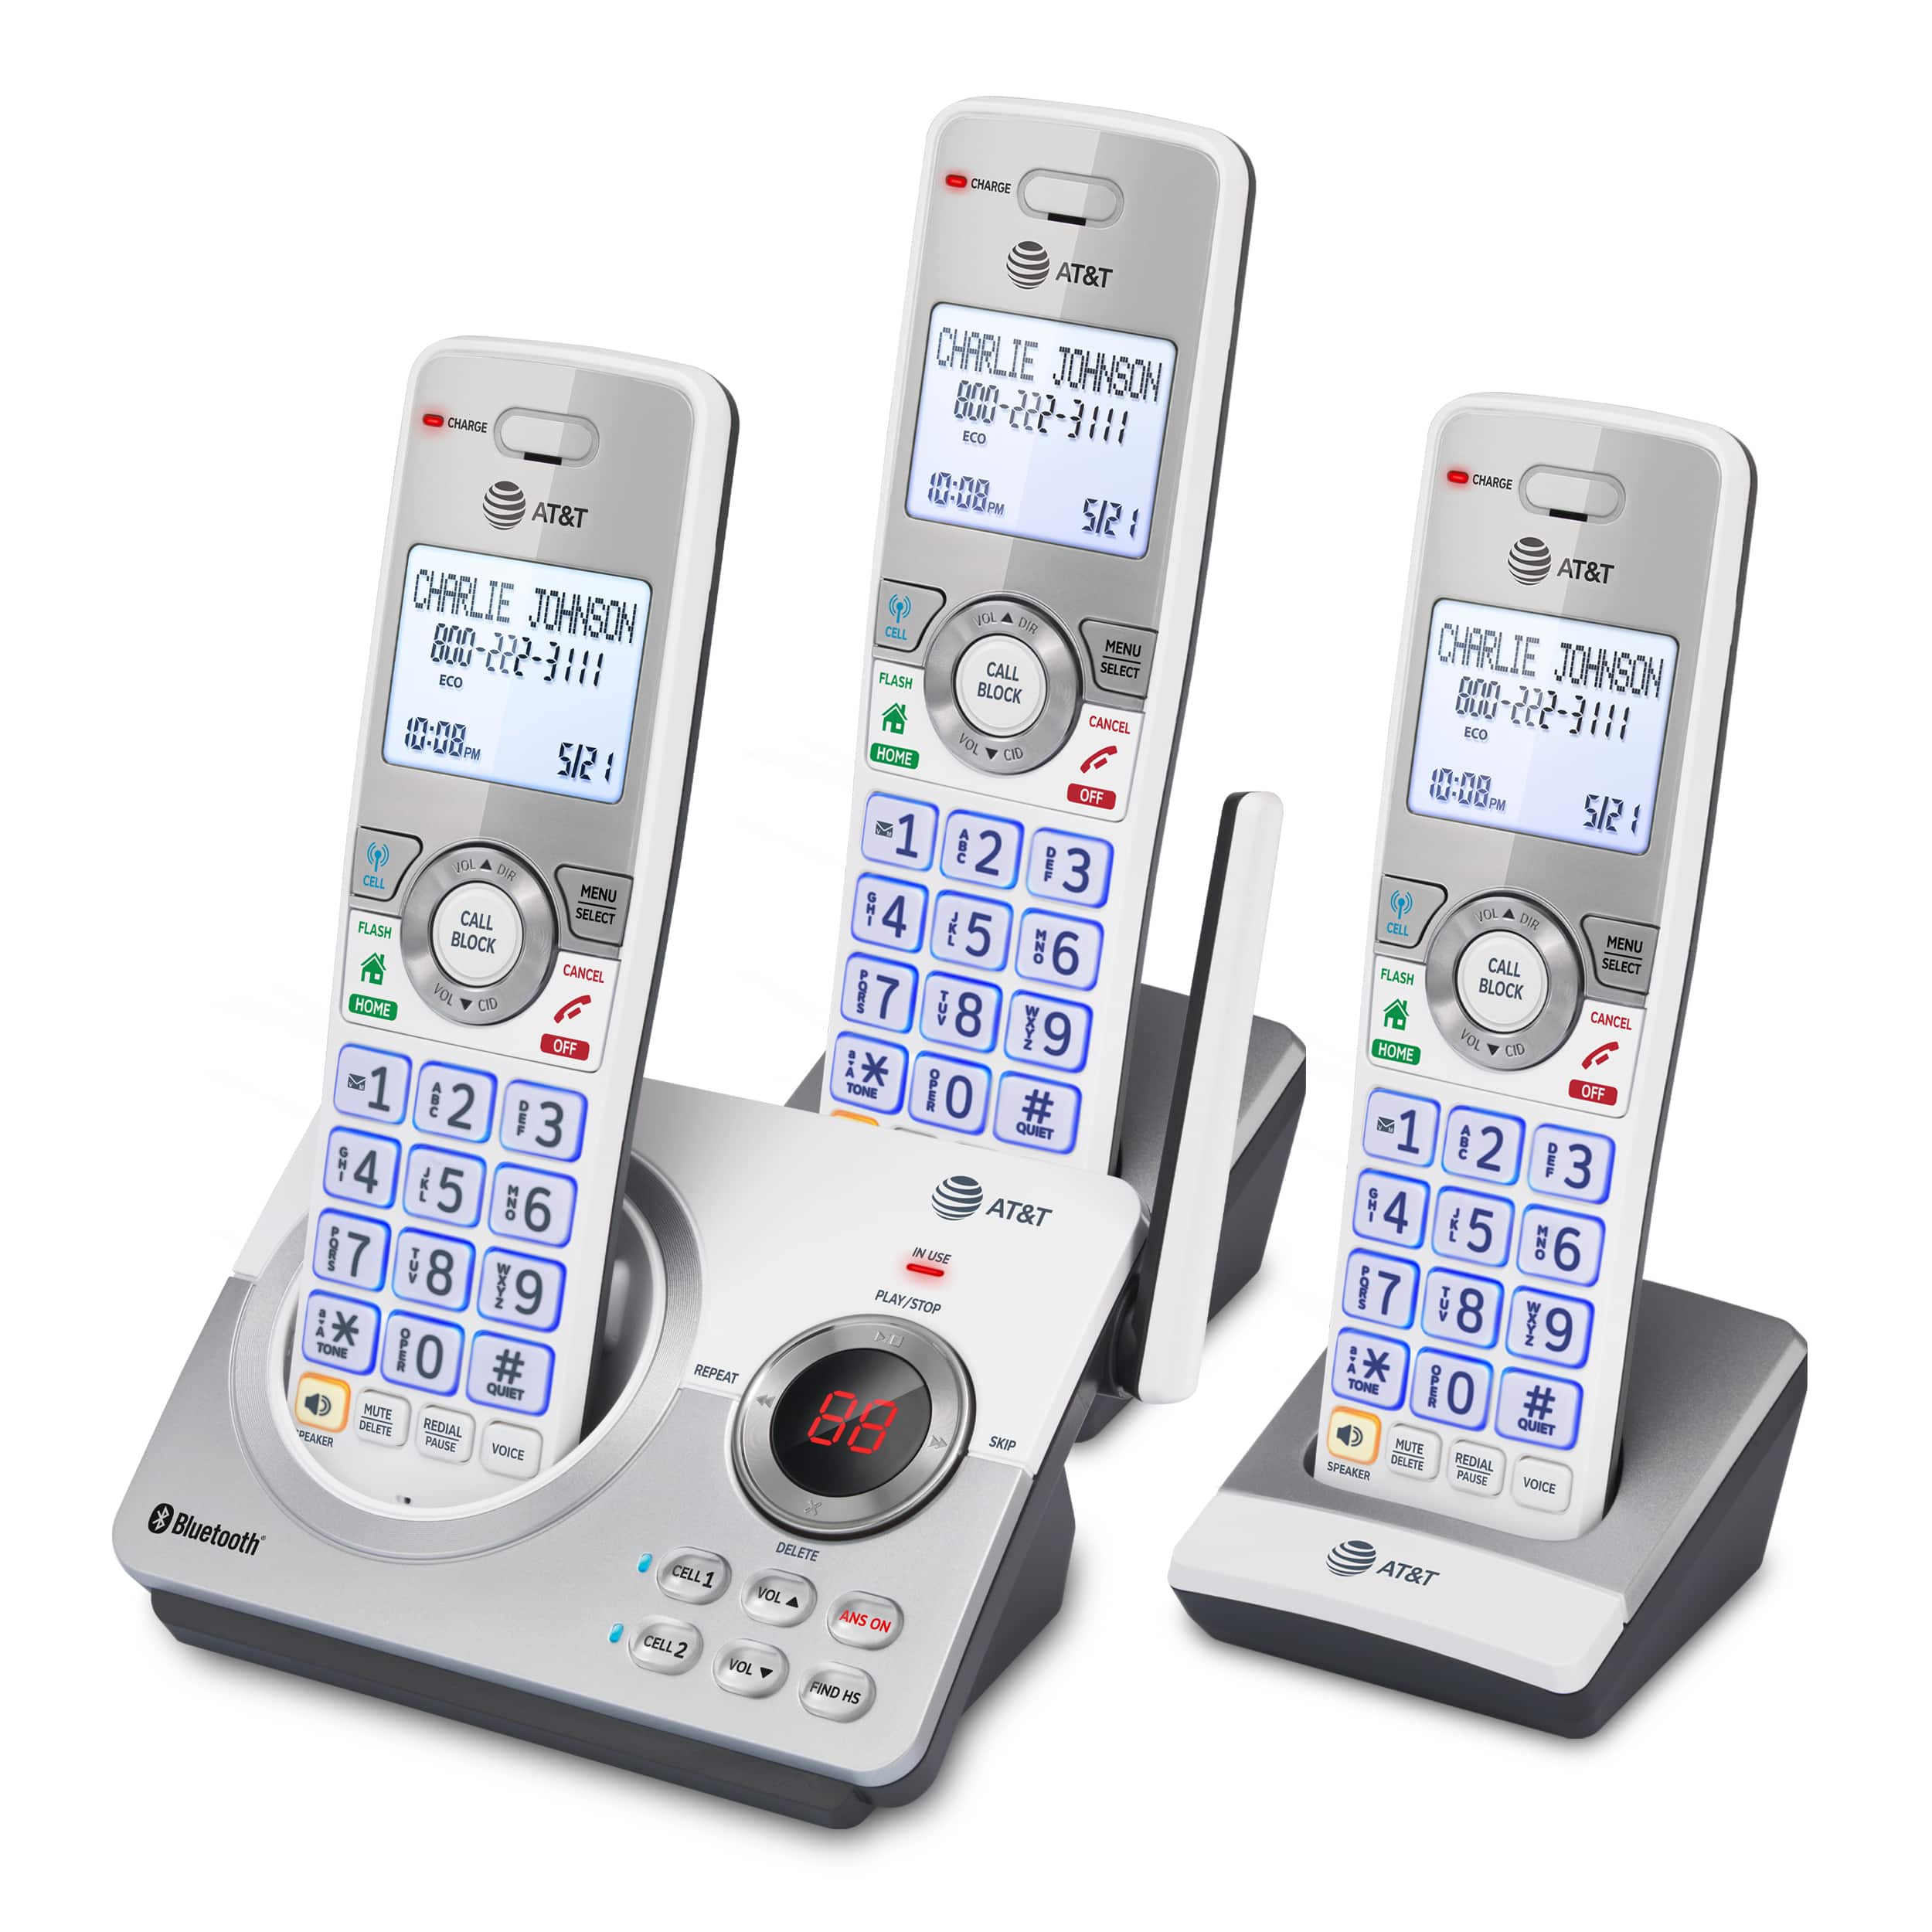 3-Handset Expandable Cordless Phone with Unsurpassed Range, Bluetooth Connect to Cell™, Smart Call Blocker and Answering System - view 3